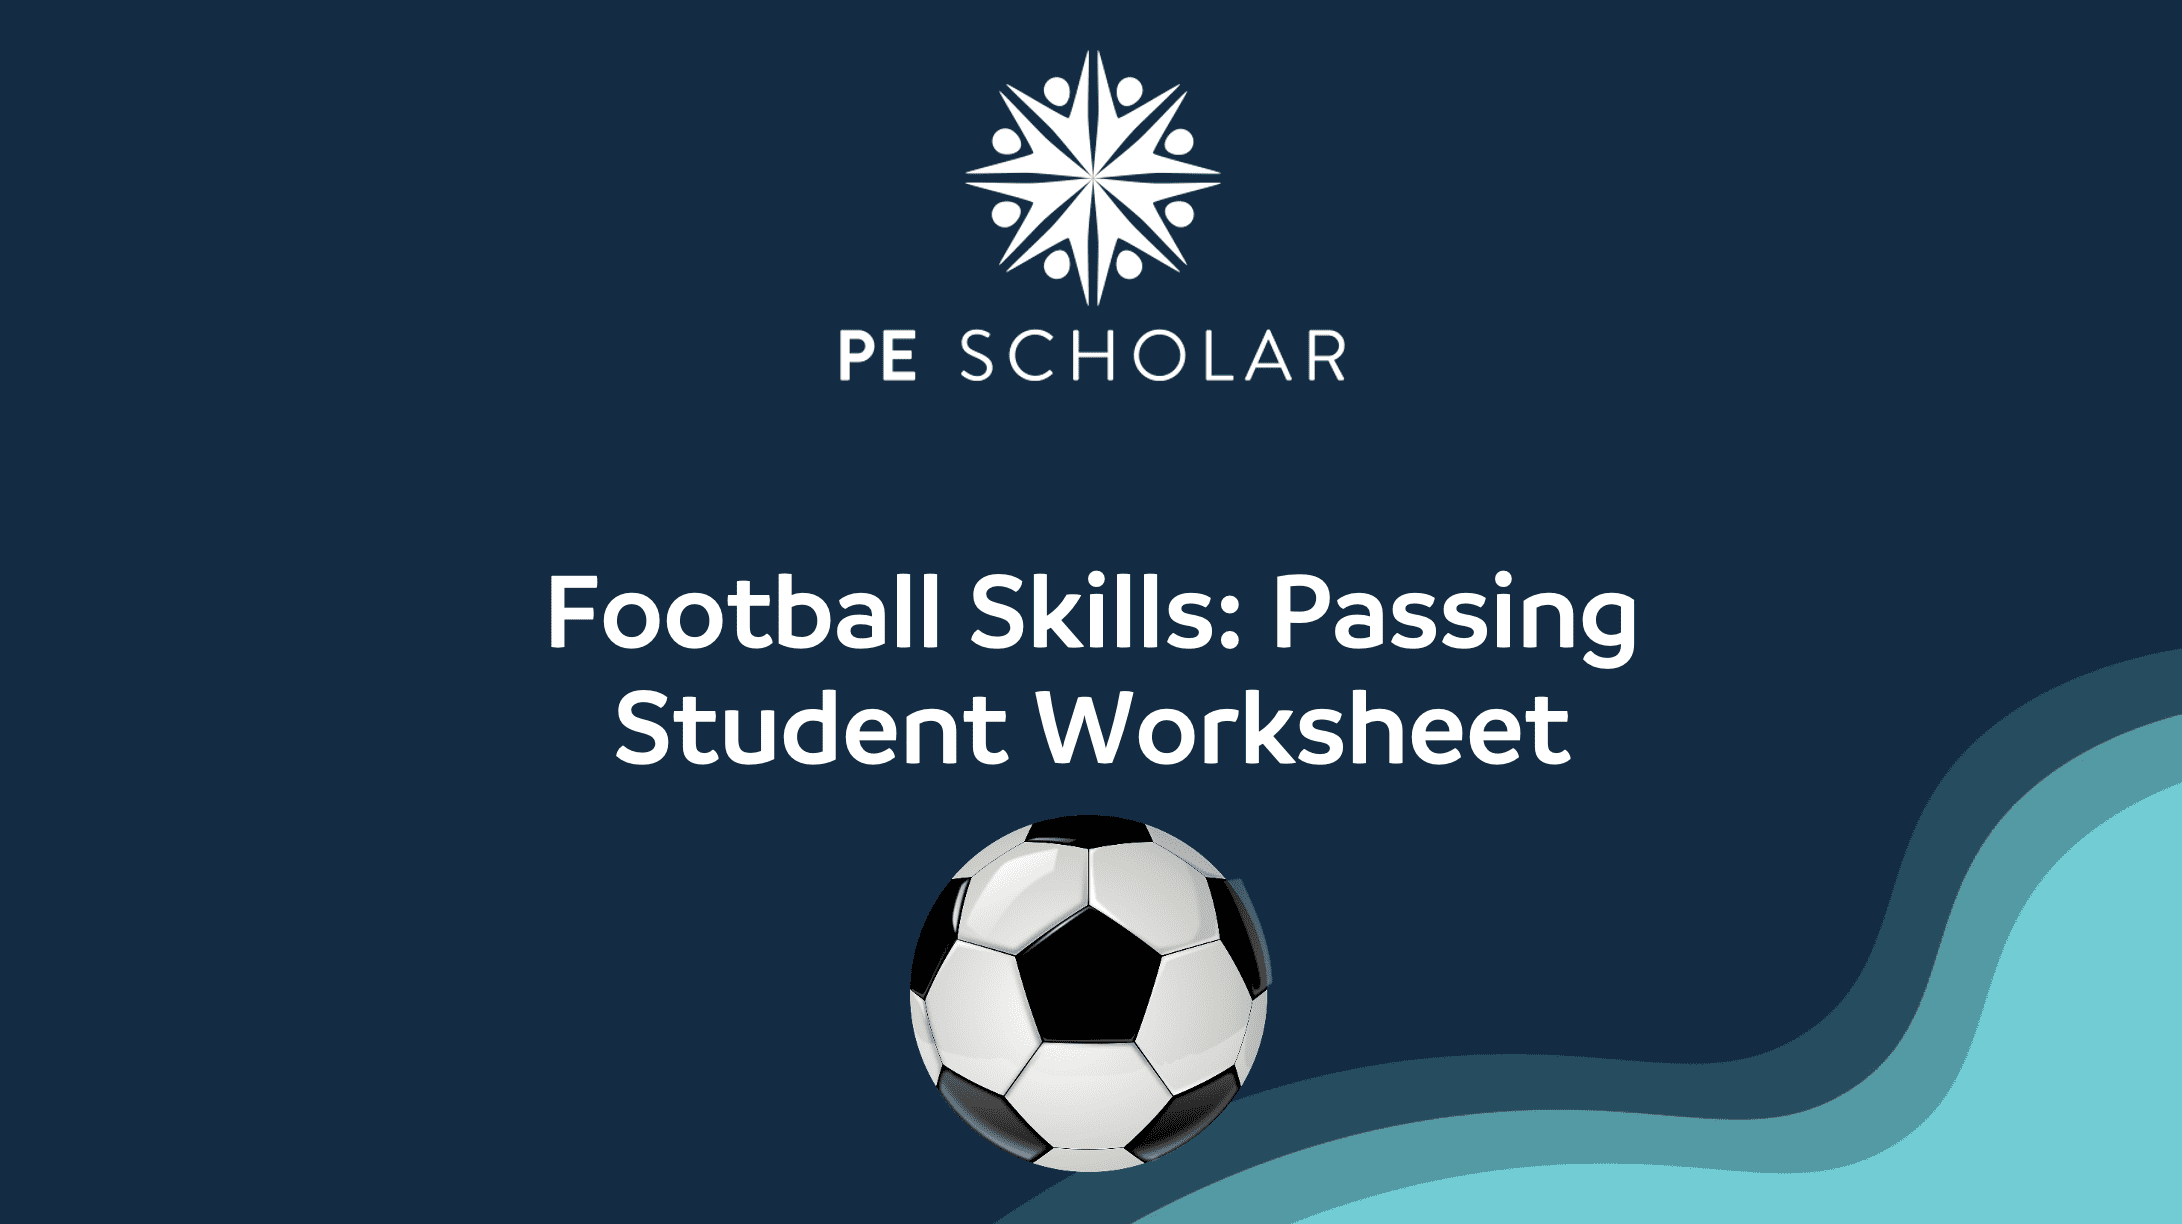 Featured image for “Football Skills: Passing Student Worksheet”